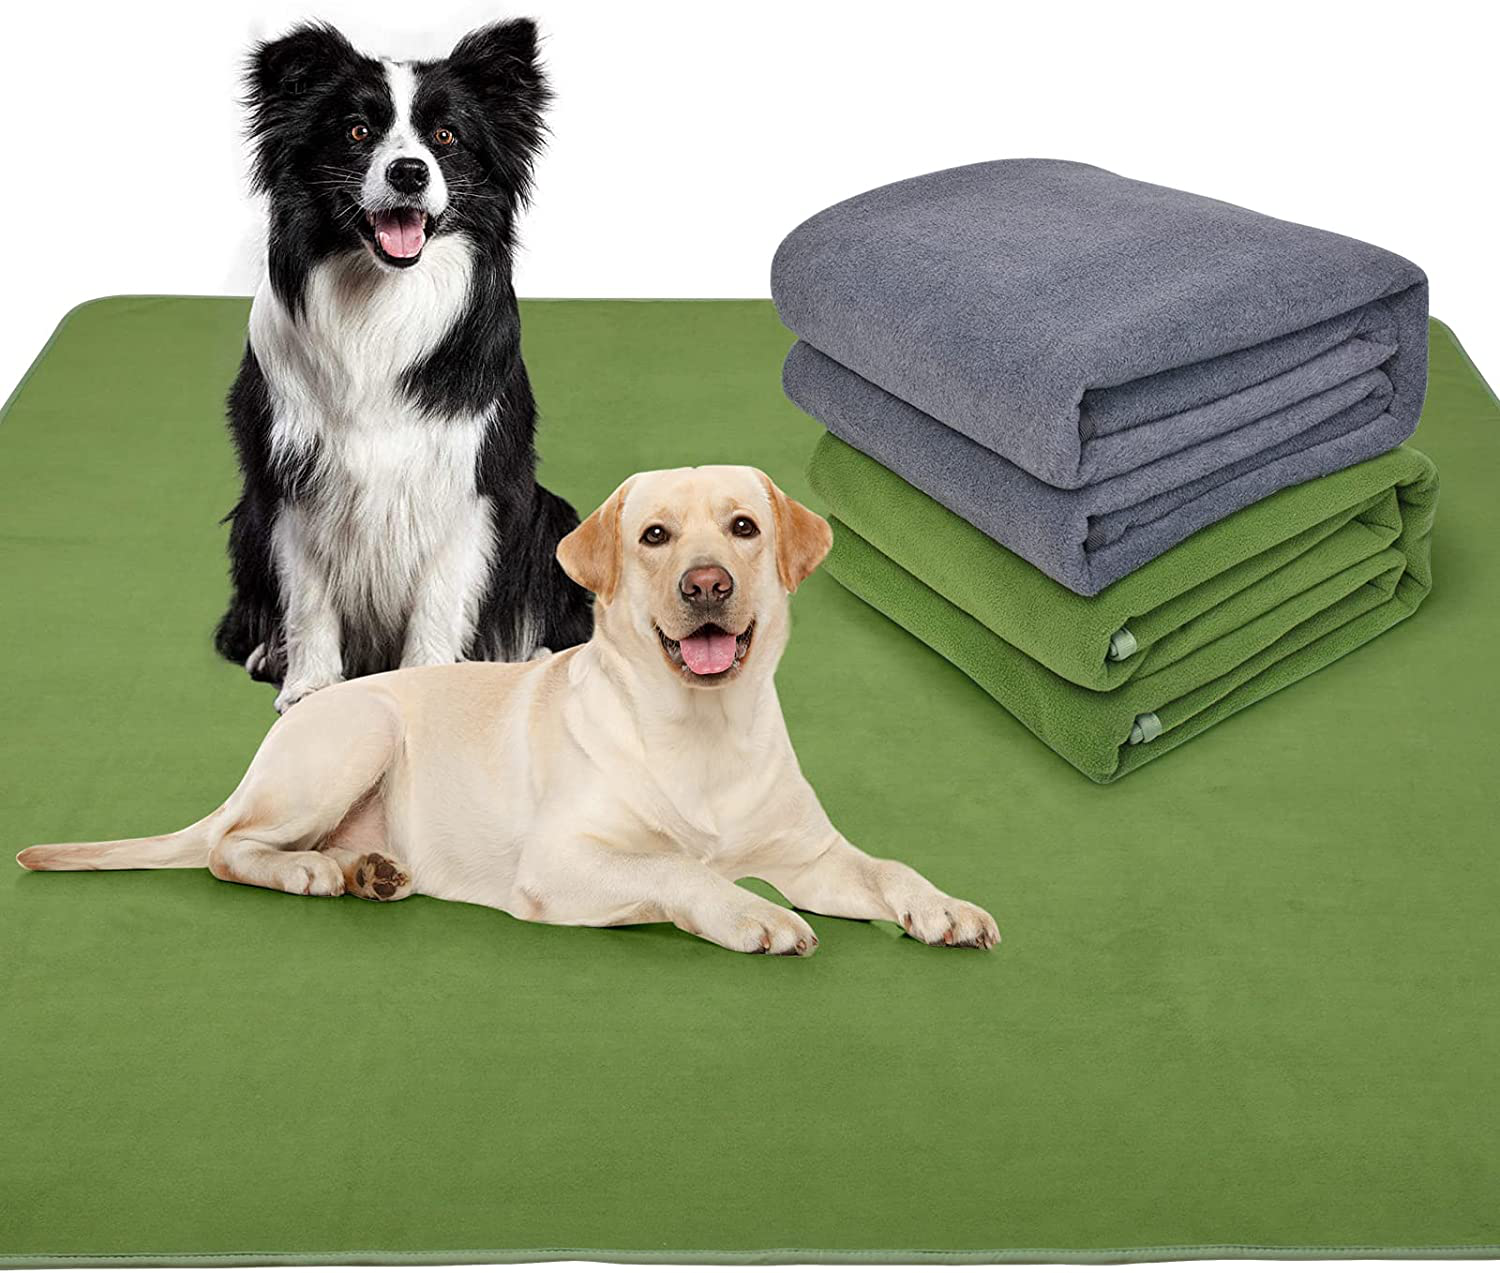 LOOBANI 2 Packs Extra Large 72"X72"/65"X48" Reusable Dog Mat for Floor, Non-Slip Washable Pee Pad for Dogs, Fast Absorbent Pet Whelping Pads & Playpen Mat for Incontinence